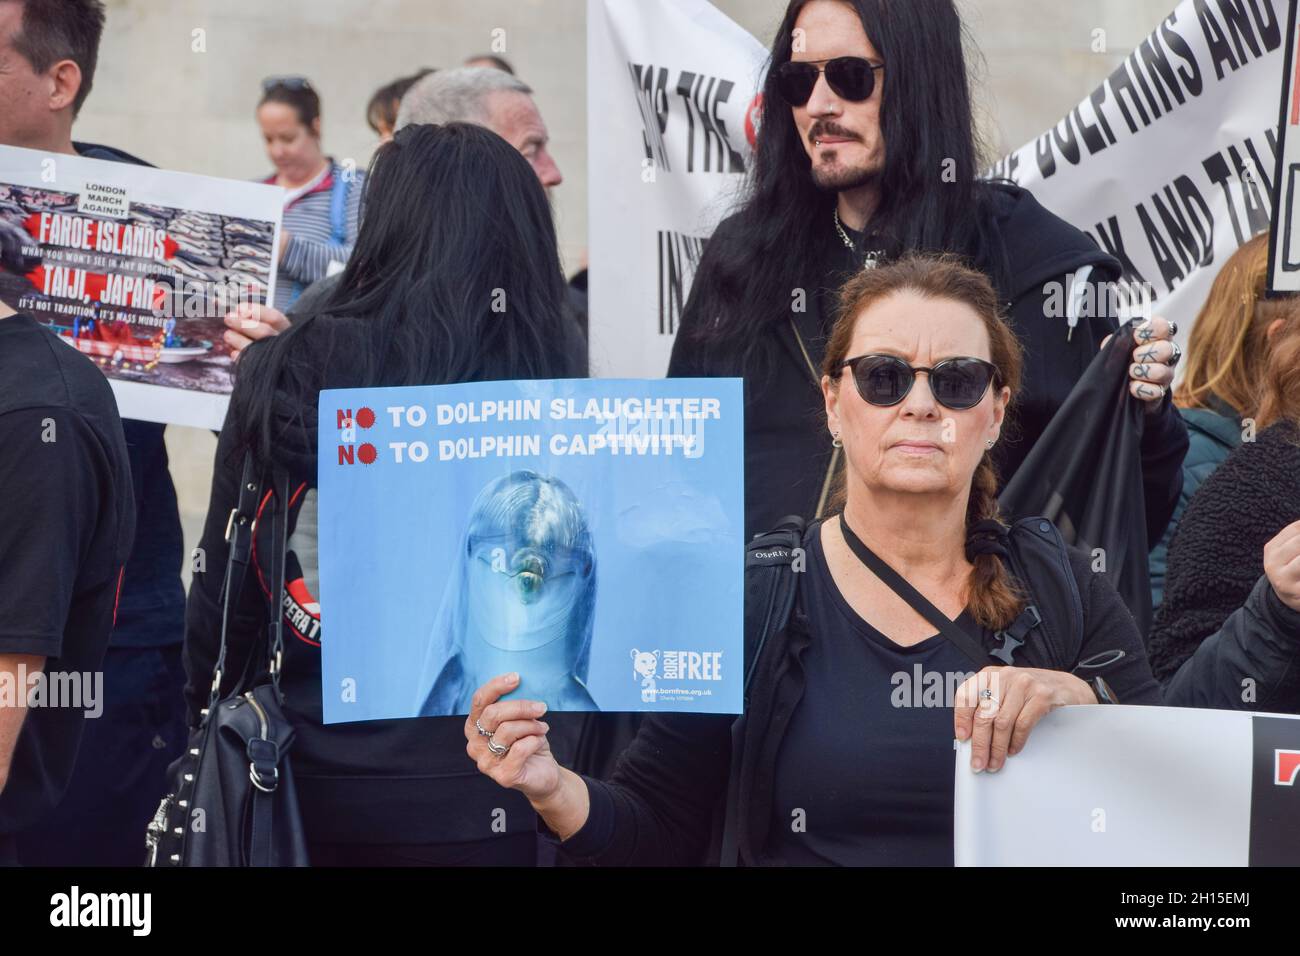 London, UK. 16th Oct, 2021. A protester holds a placard calling for an end to dolphin hunts and captivity during the demonstration in Trafalgar Square.Members of marine conservation organization Sea Shepherd and other activists marched through Westminster, calling for an end to the slaughter of dolphins in Faroe Islands and Taiji, Japan. (Photo by Vuk Valcic/SOPA Images/Sipa USA) Credit: Sipa USA/Alamy Live News Stock Photo